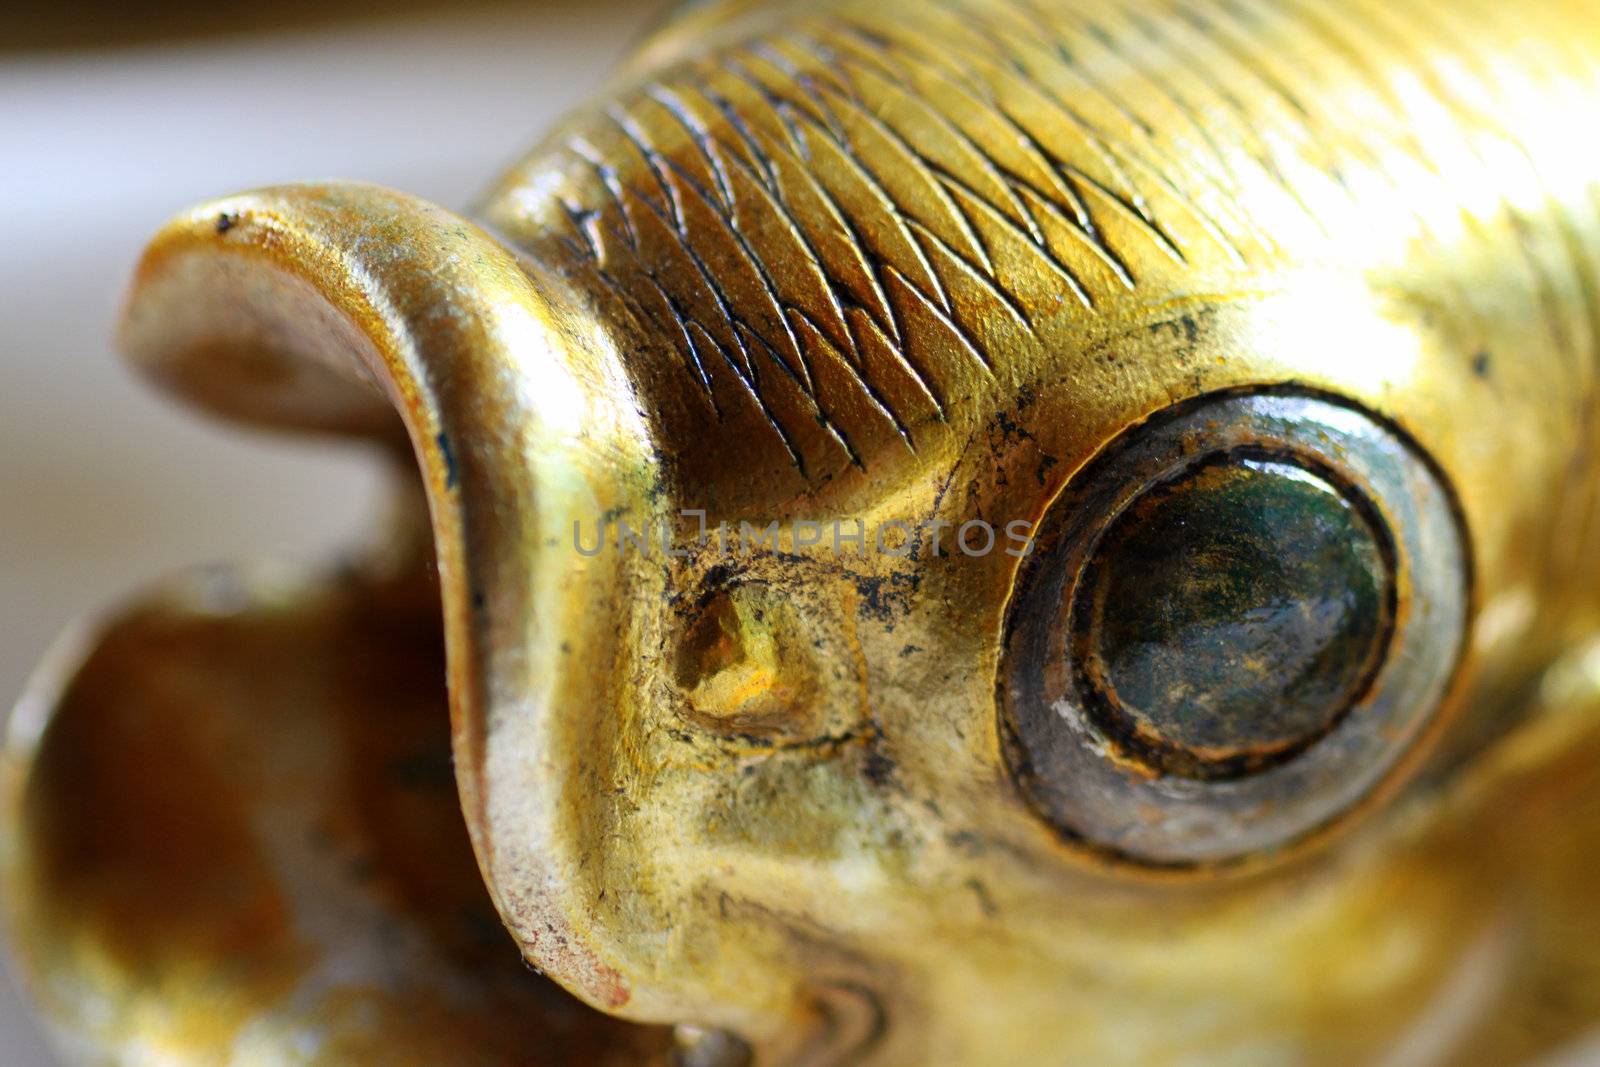 a golden, ancient fish - close-up of the eye and mouth
